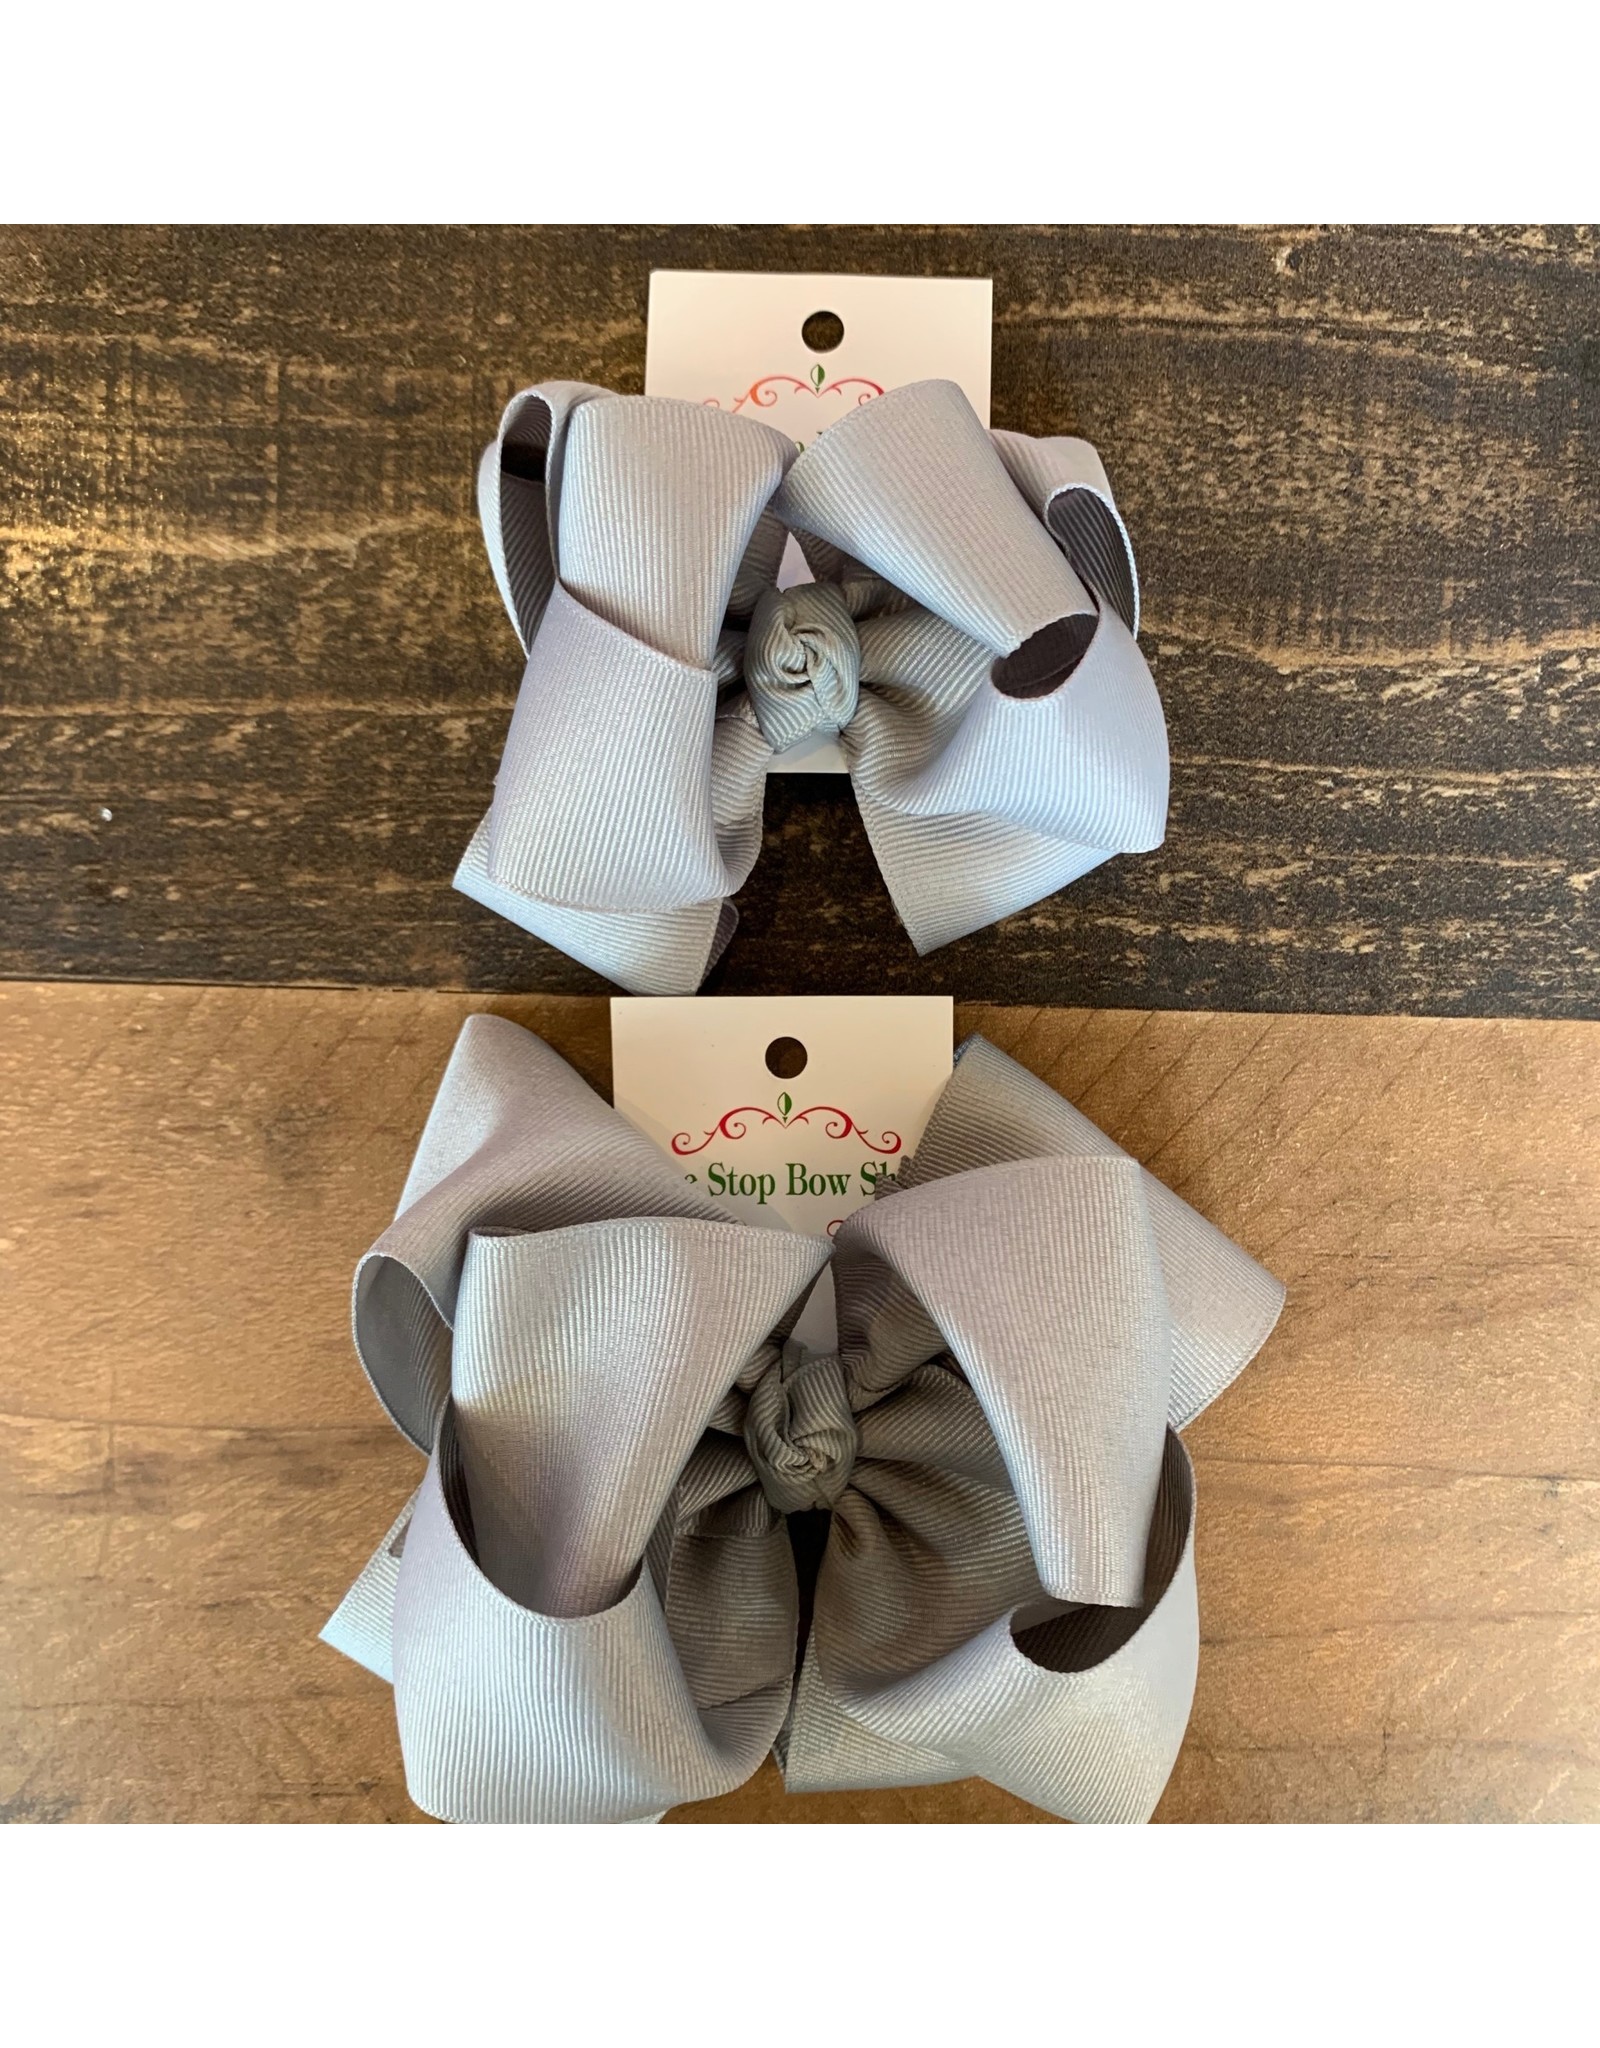 OS- Silver Stacked Grosgrain Bow